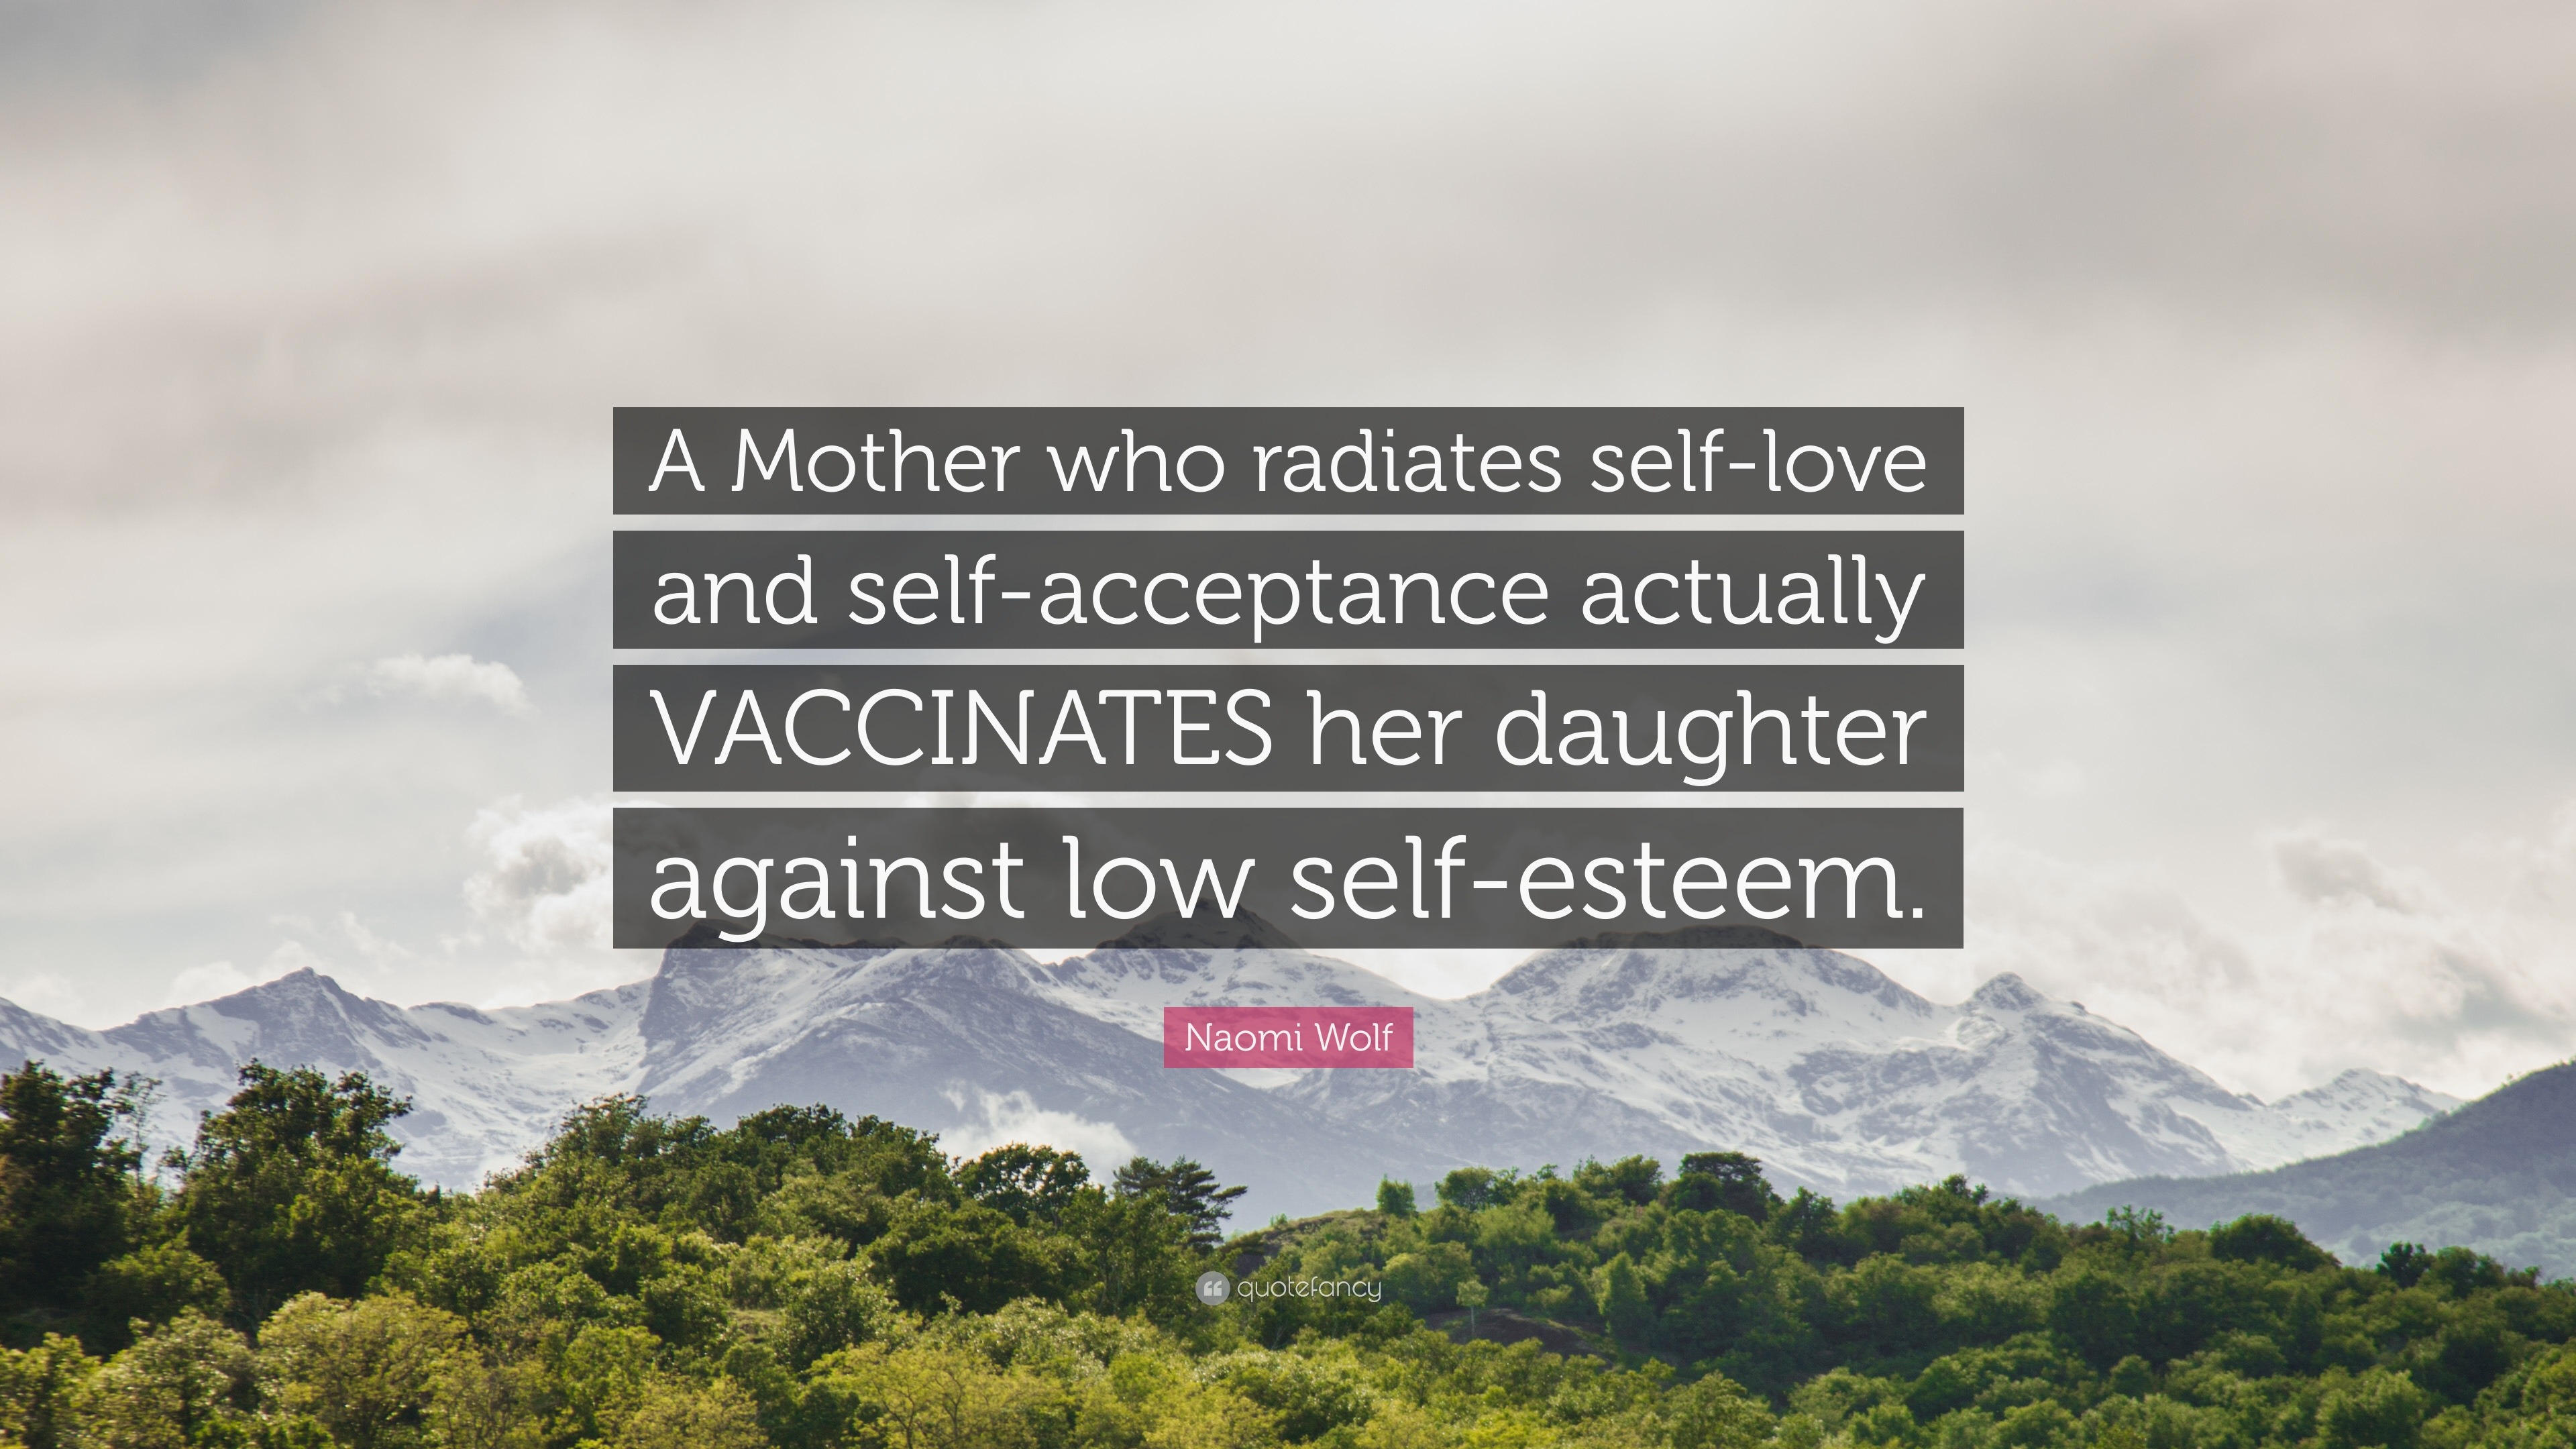 Naomi Wolf Quote “A Mother who radiates self love and self acceptance